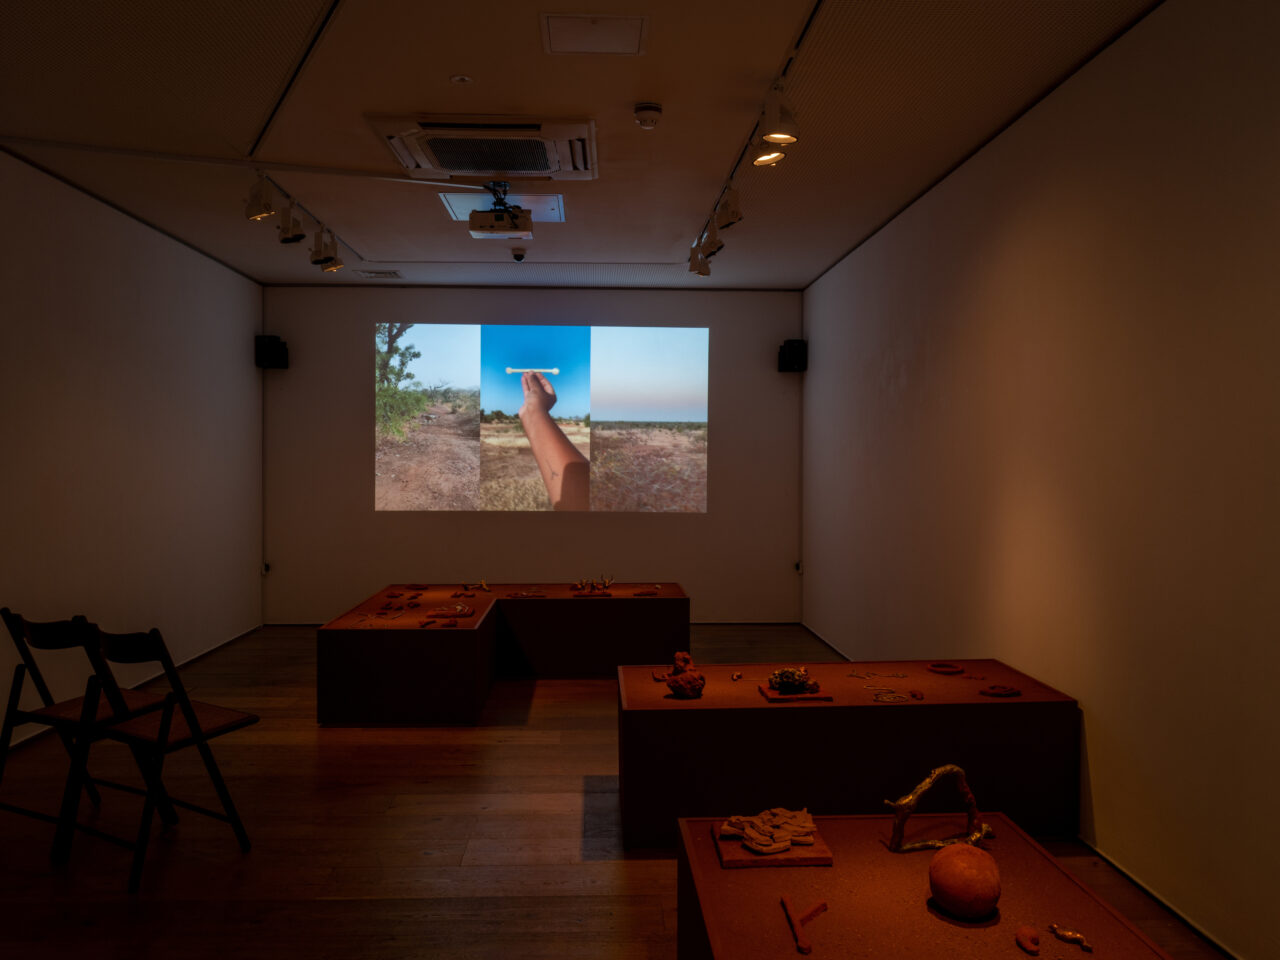 A mid-lit gallery space with a projection on the back wall with a split screen film. In the middle of the space is 3 large built plinths, which consists of mixed media and objects all in a orange sand-like colour and texture.